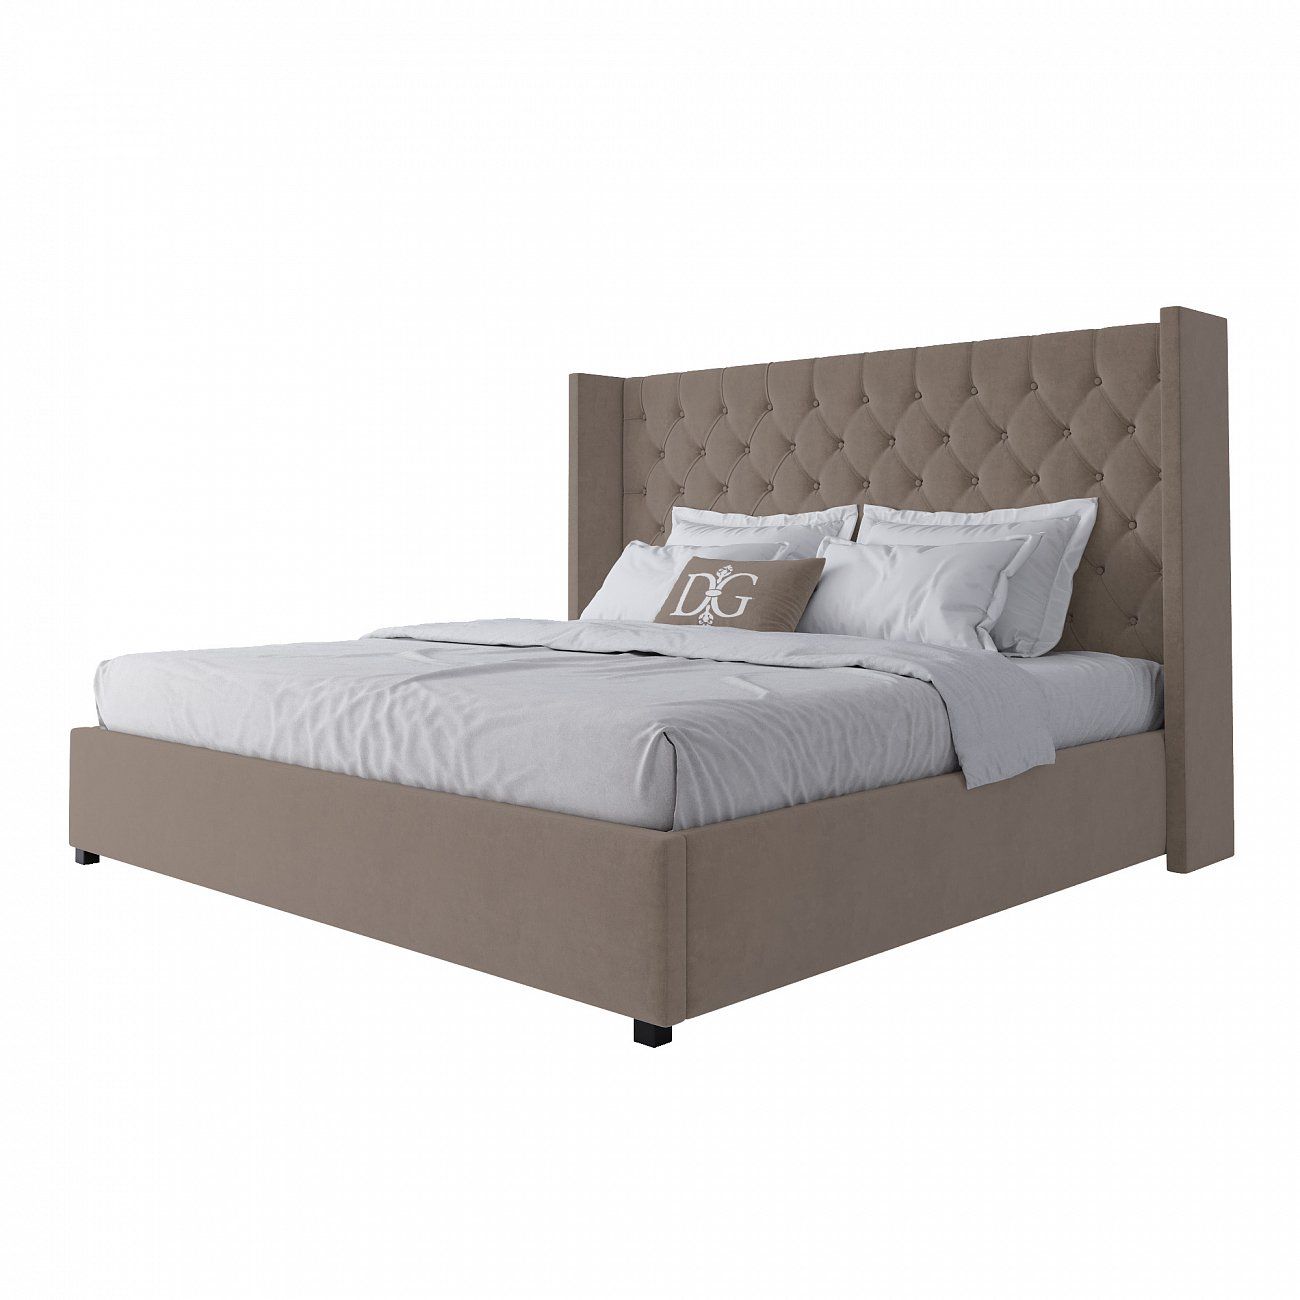 Double bed with upholstered headboard 200x200 cm beige Wing-2